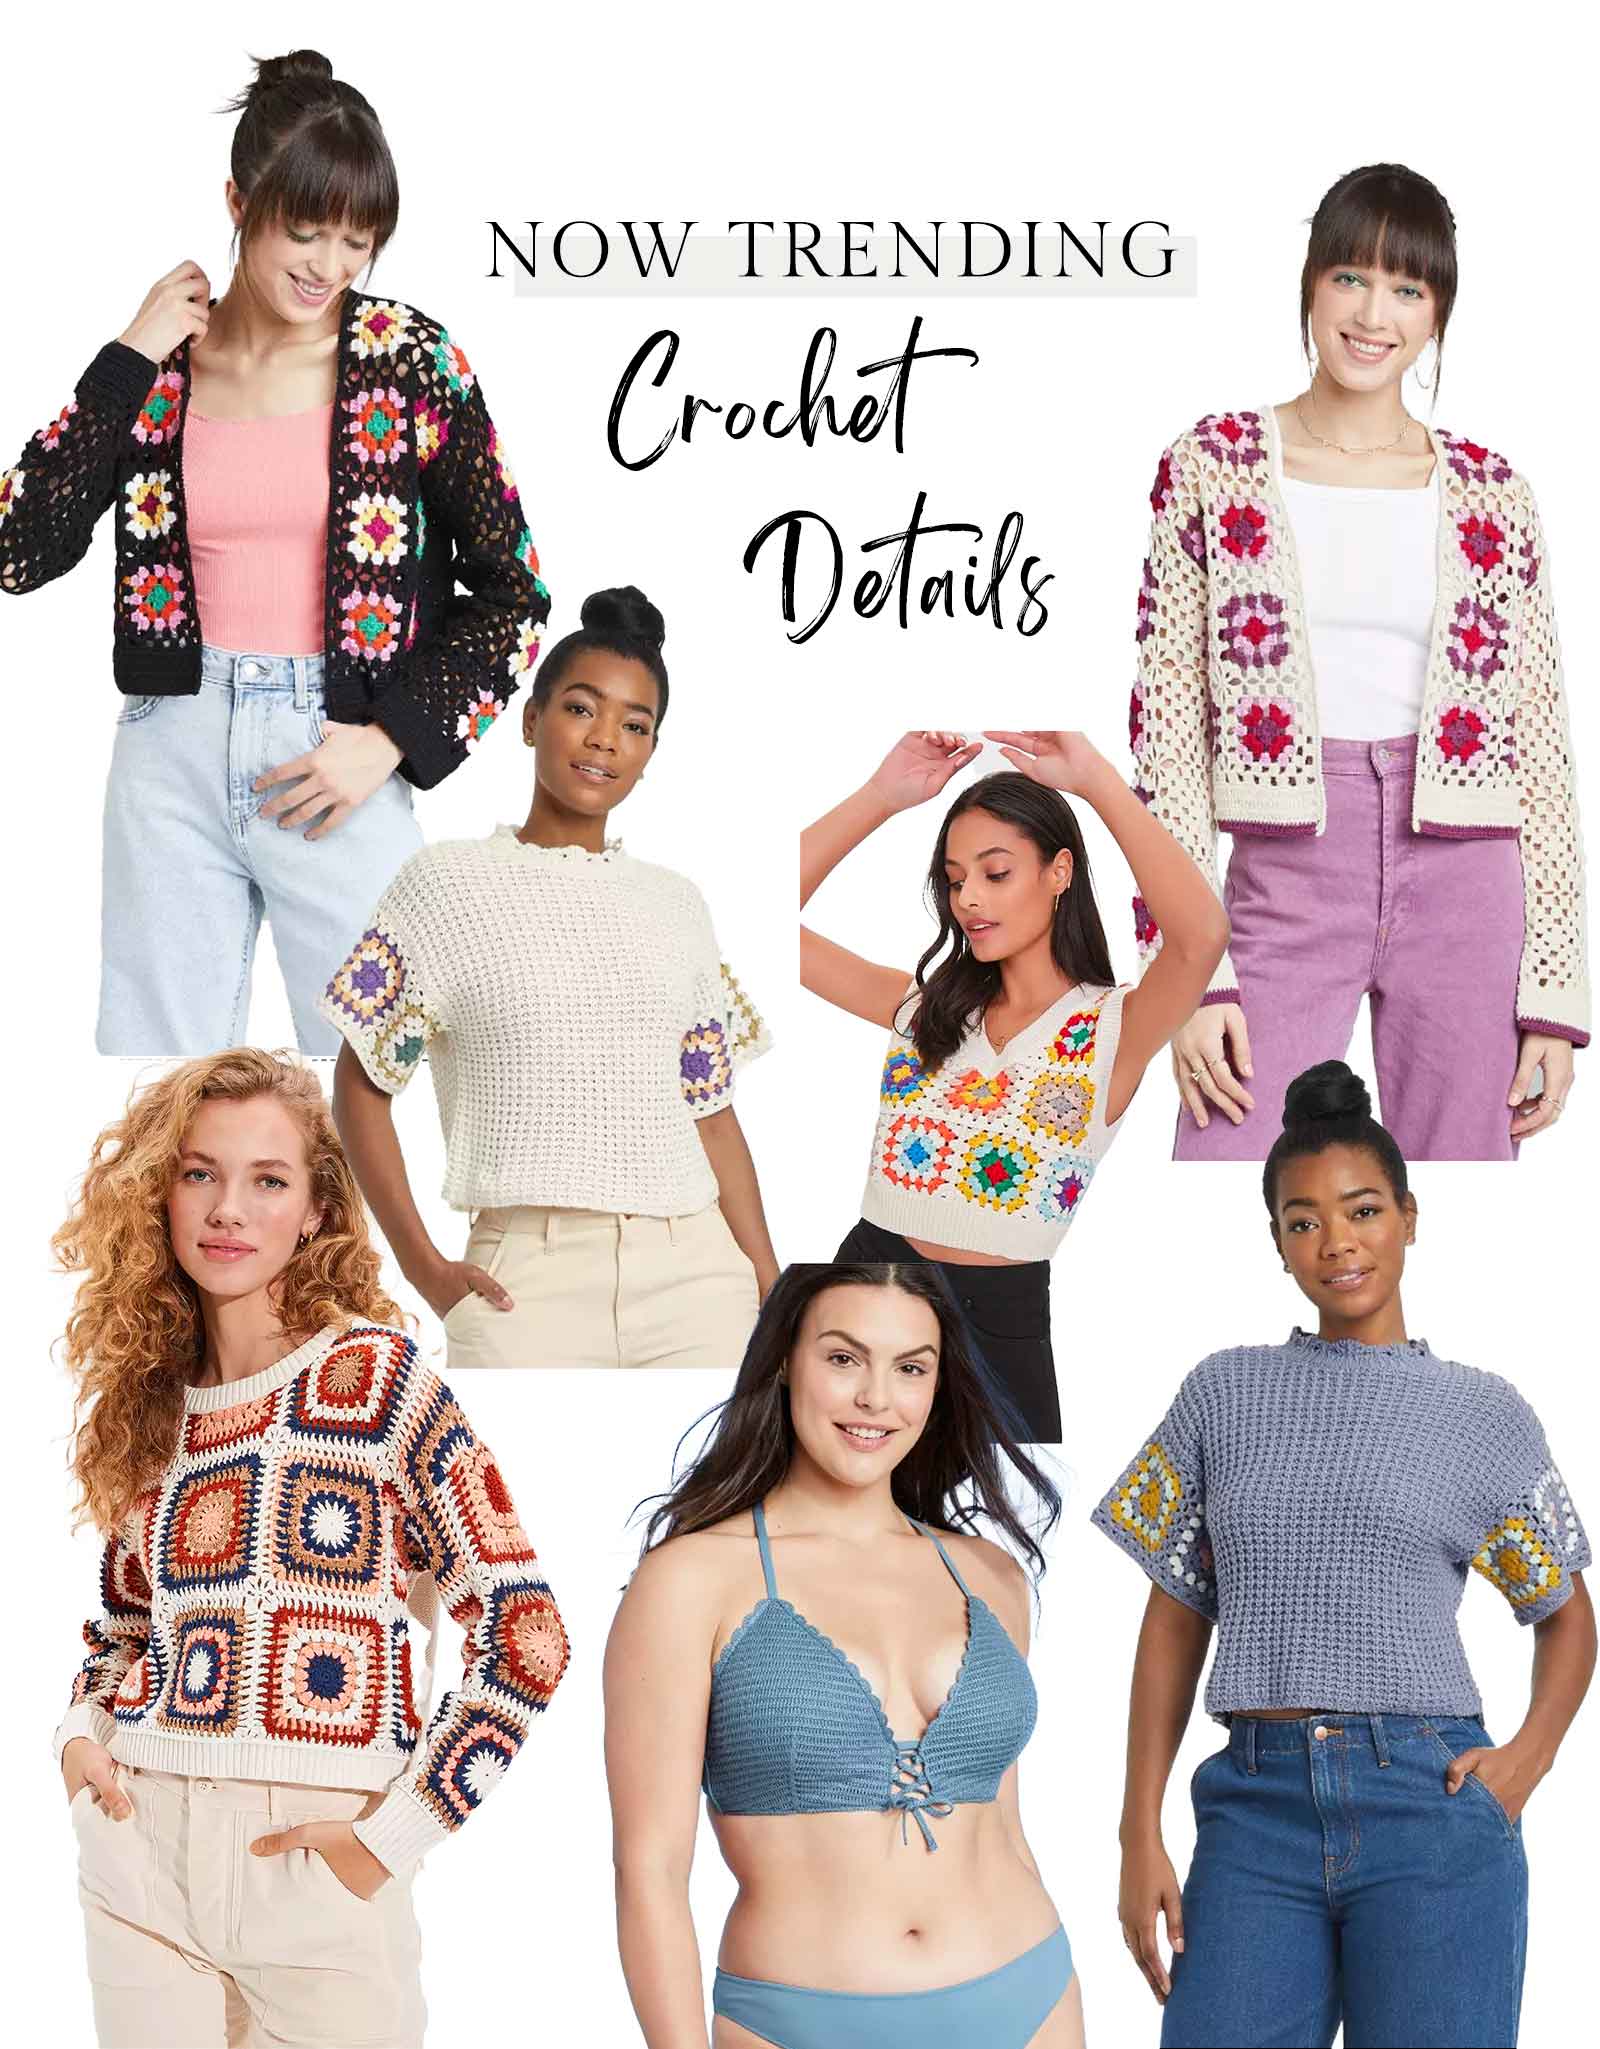 Crochet fashion trend for spring 2022